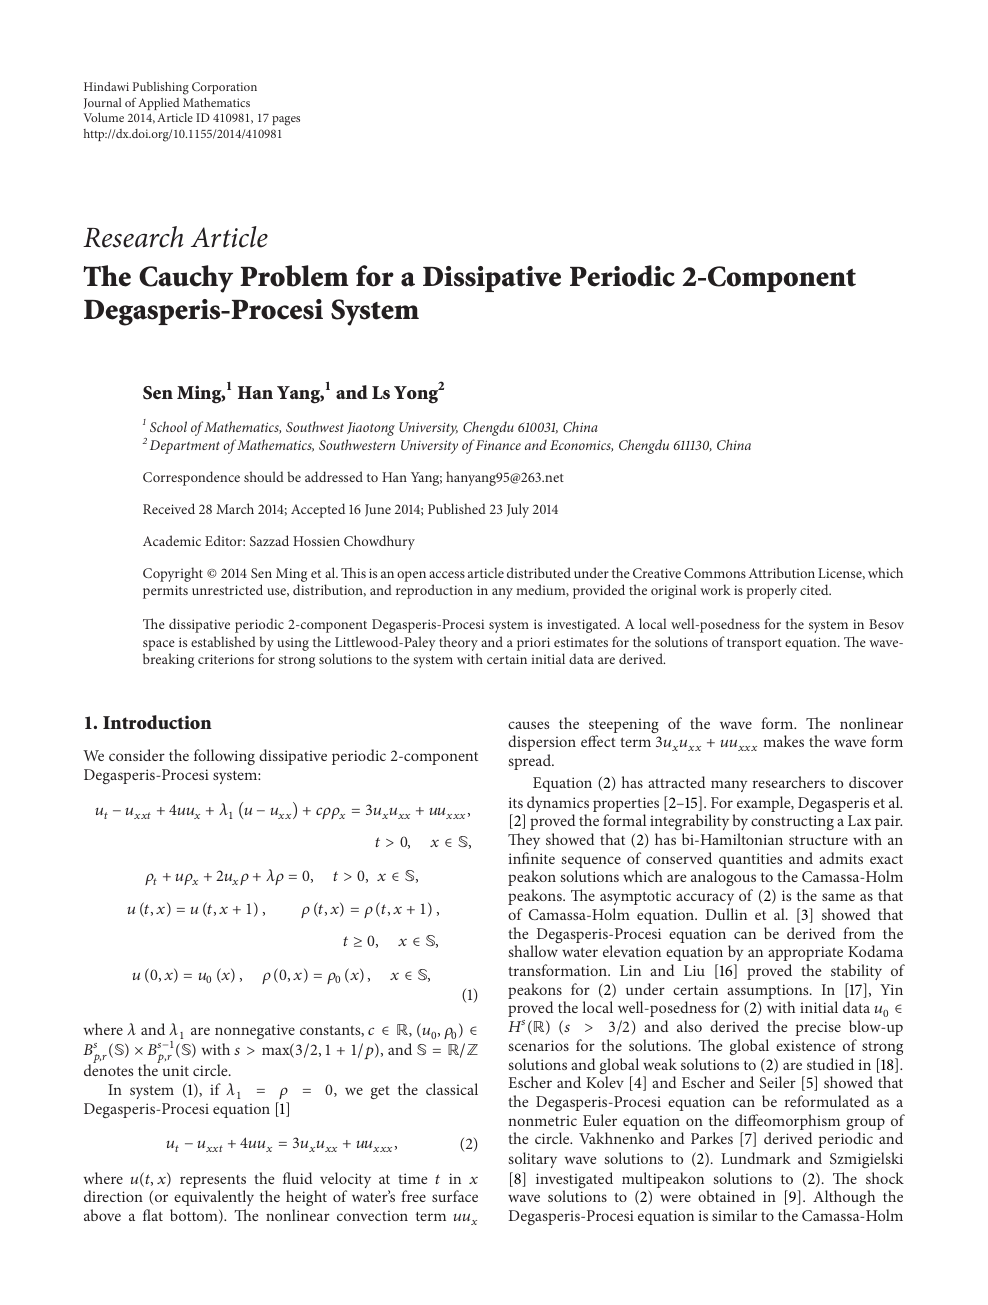 The Cauchy Problem For A Dissipative Periodic 2 Component Degasperis Procesi System Topic Of Research Paper In Mathematics Download Scholarly Article Pdf And Read For Free On Cyberleninka Open Science Hub